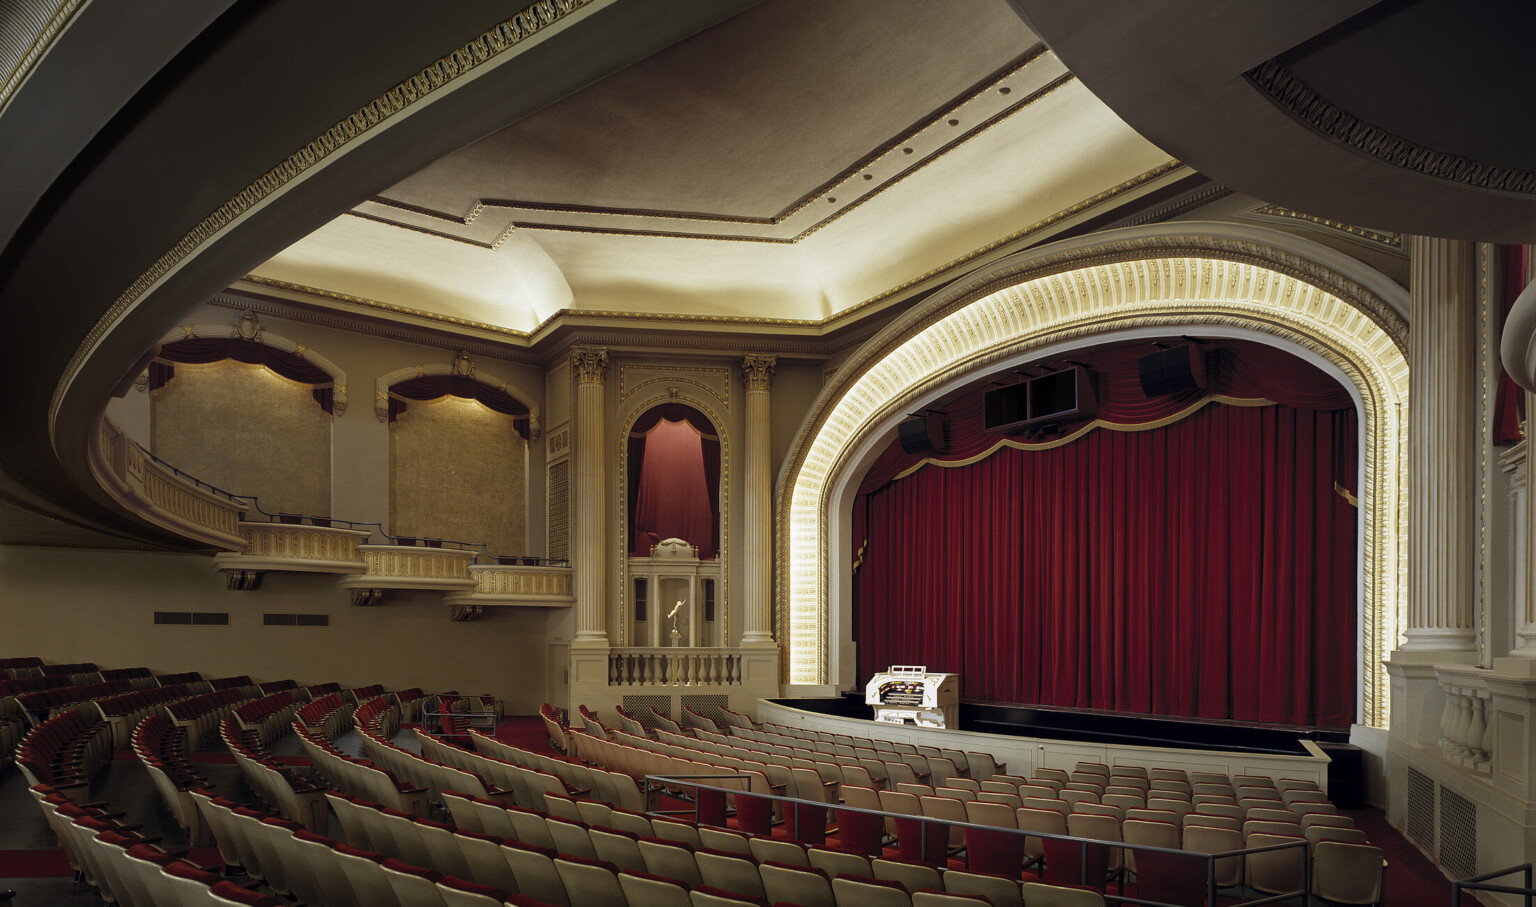 historic 1927 vintage grand theater with curved lowered ceiling design, dramatic lighting, red curtain behind stage, orchestra pit, traditional red theater seating